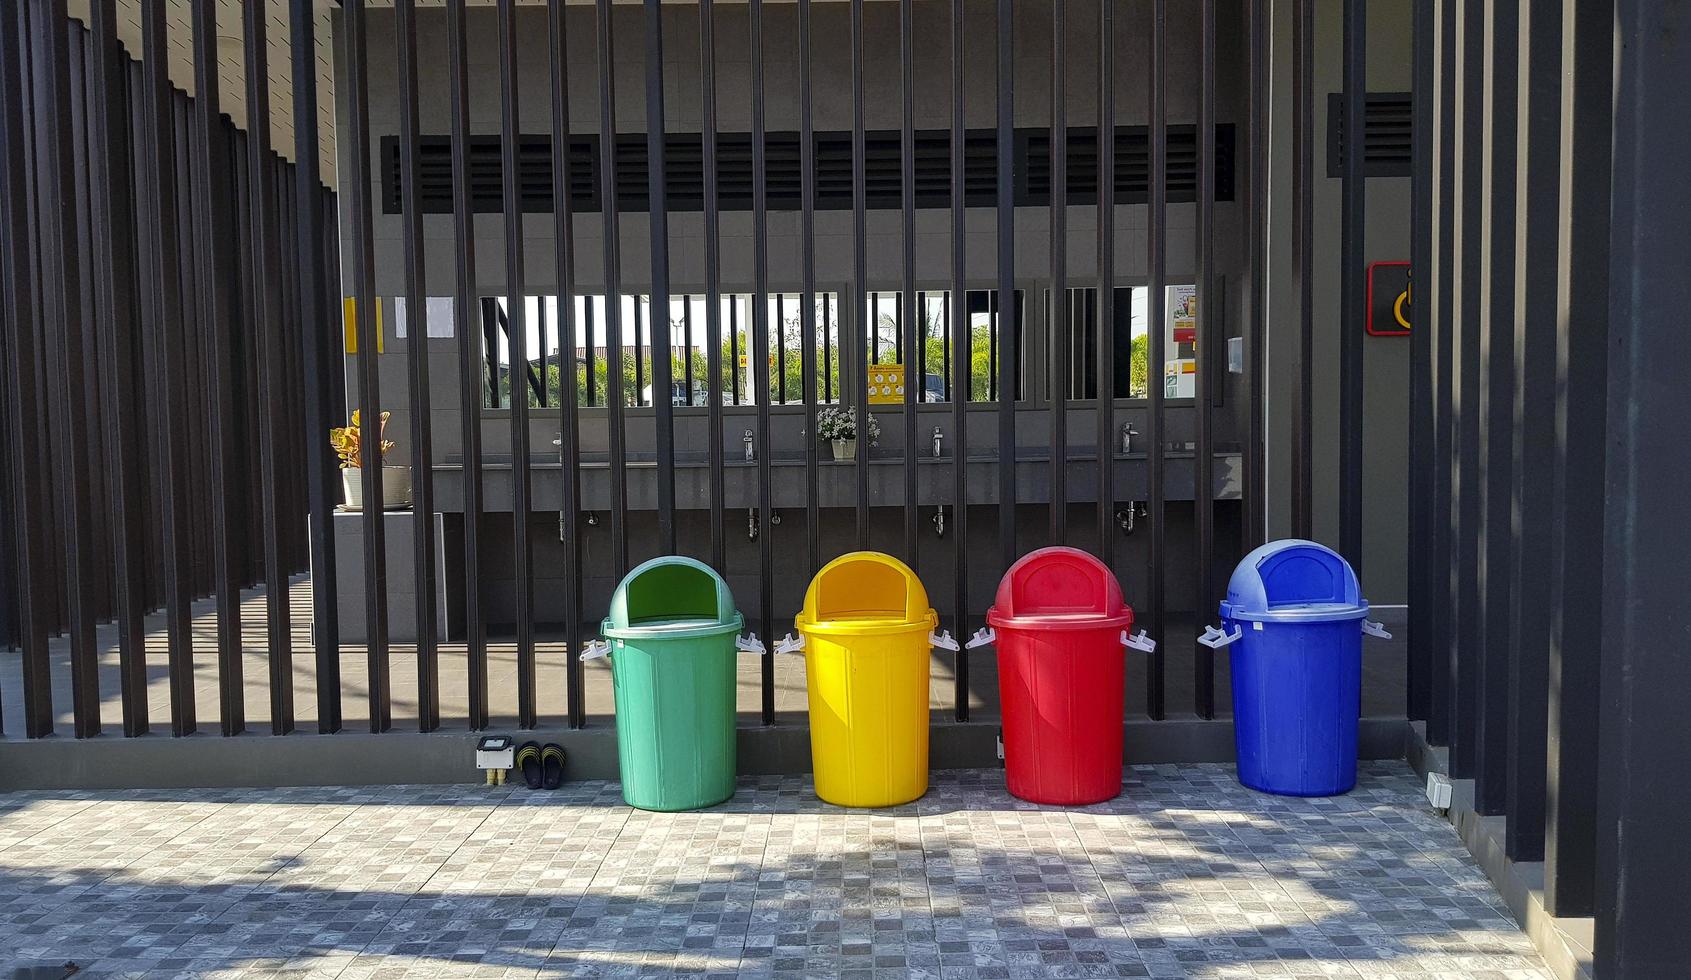 Many colorful recycle bin, dumping of garbage and child sandals putting in front of toilet, rest room or washroom with black stainless steel chrome or fence background. photo